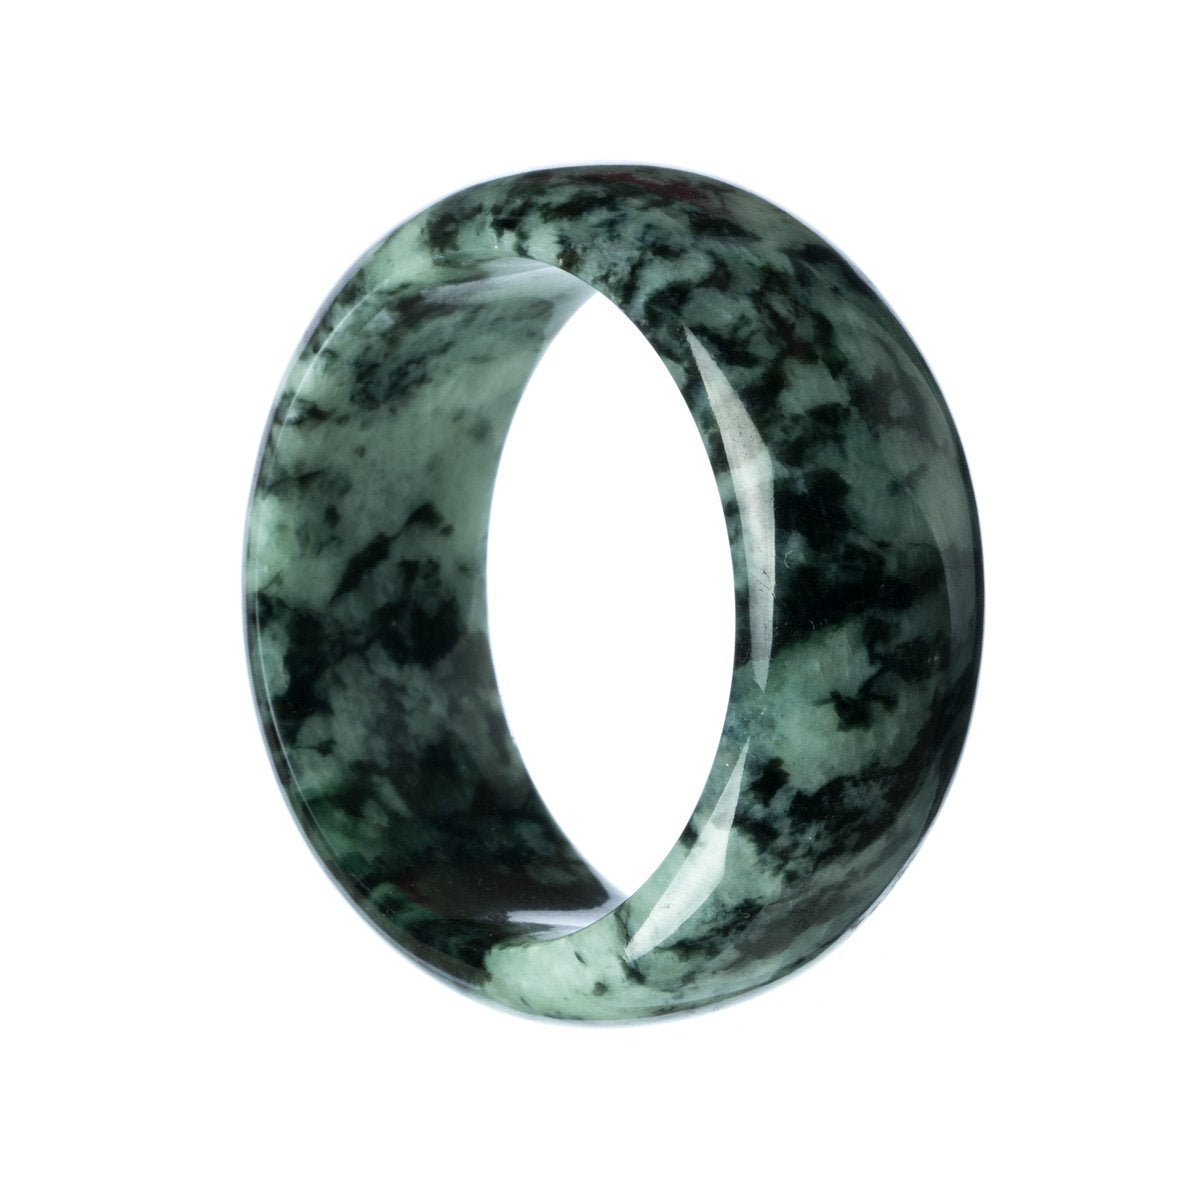 A flat, 58mm genuine Type A Green Jade Bangle Bracelet from MAYS.